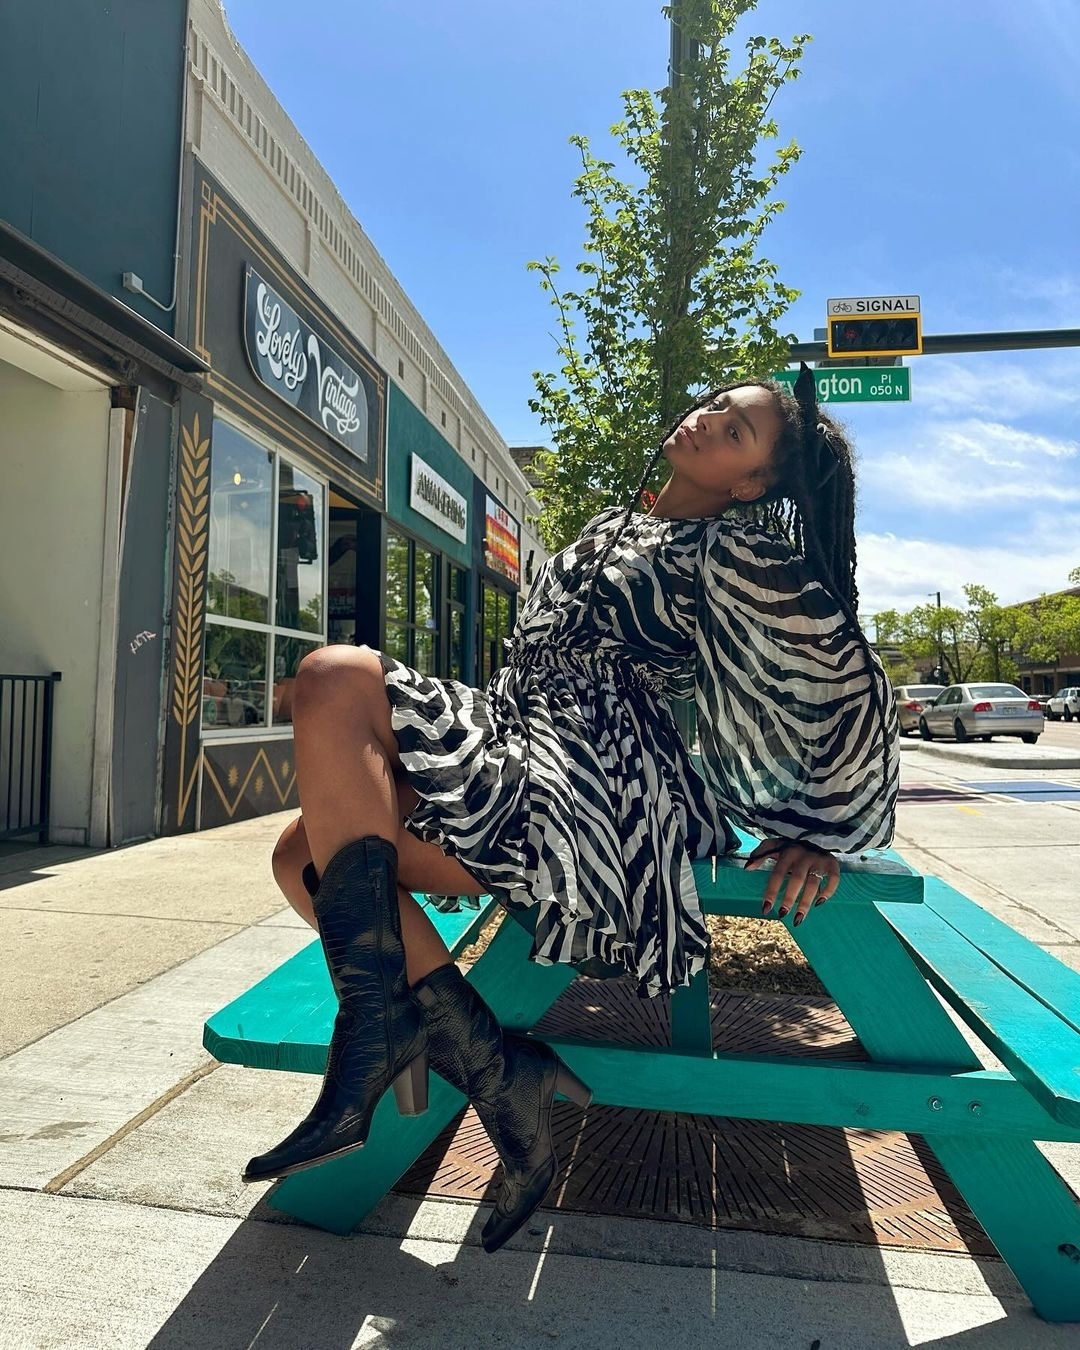 Every day brings a new opportunity to step out in style. 🧡🤩

Do you love fashion? Bring your passion to Crossroads! Our goal is to create a fun, inclusive environment to buy and sell secondhand fashion. If this sounds like something you are interested in, click the careers link in our bio to apply online! 🌟

📸: Crossroads Denver @crossroads_colorado 

#crossroadstrading #crossroadsfinds #crossroadsstore #fashionfinds #buyselltrade #style #thriftfinds #consignment #shopping #womensfashion #mensfashion #fashionblogger #ootd #fashion #thrift #sustainablefashion #secondhandfirst #shopthrift #consignment #thrifted